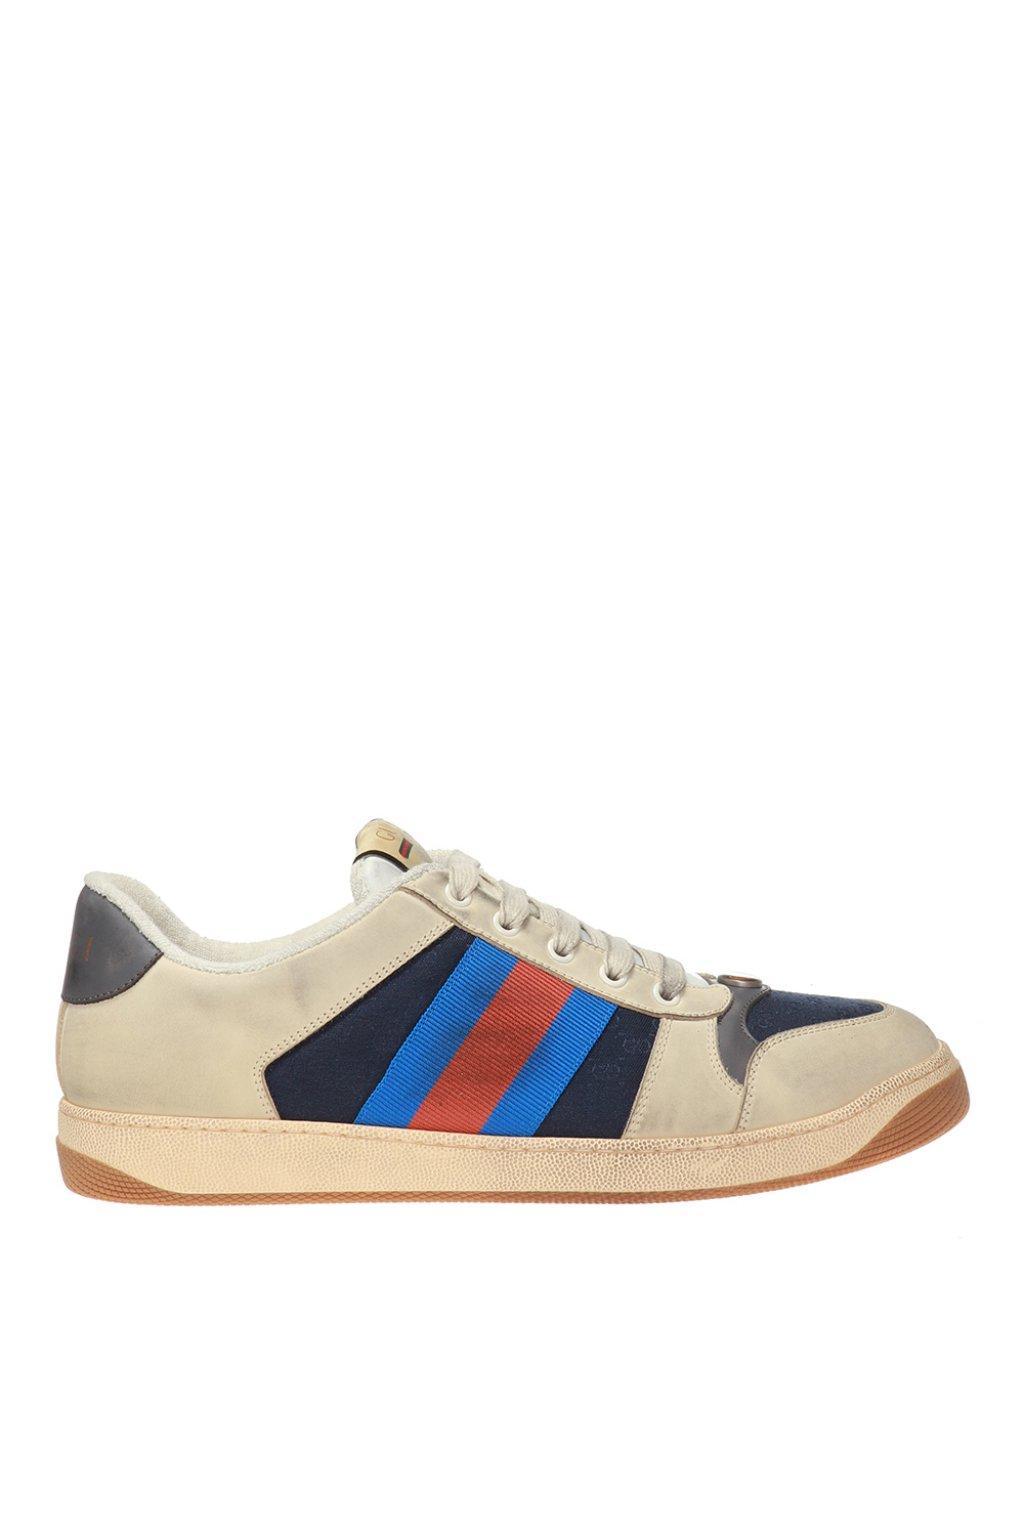 Gucci Screener GG Sneakers in White (Blue) for Men - Lyst